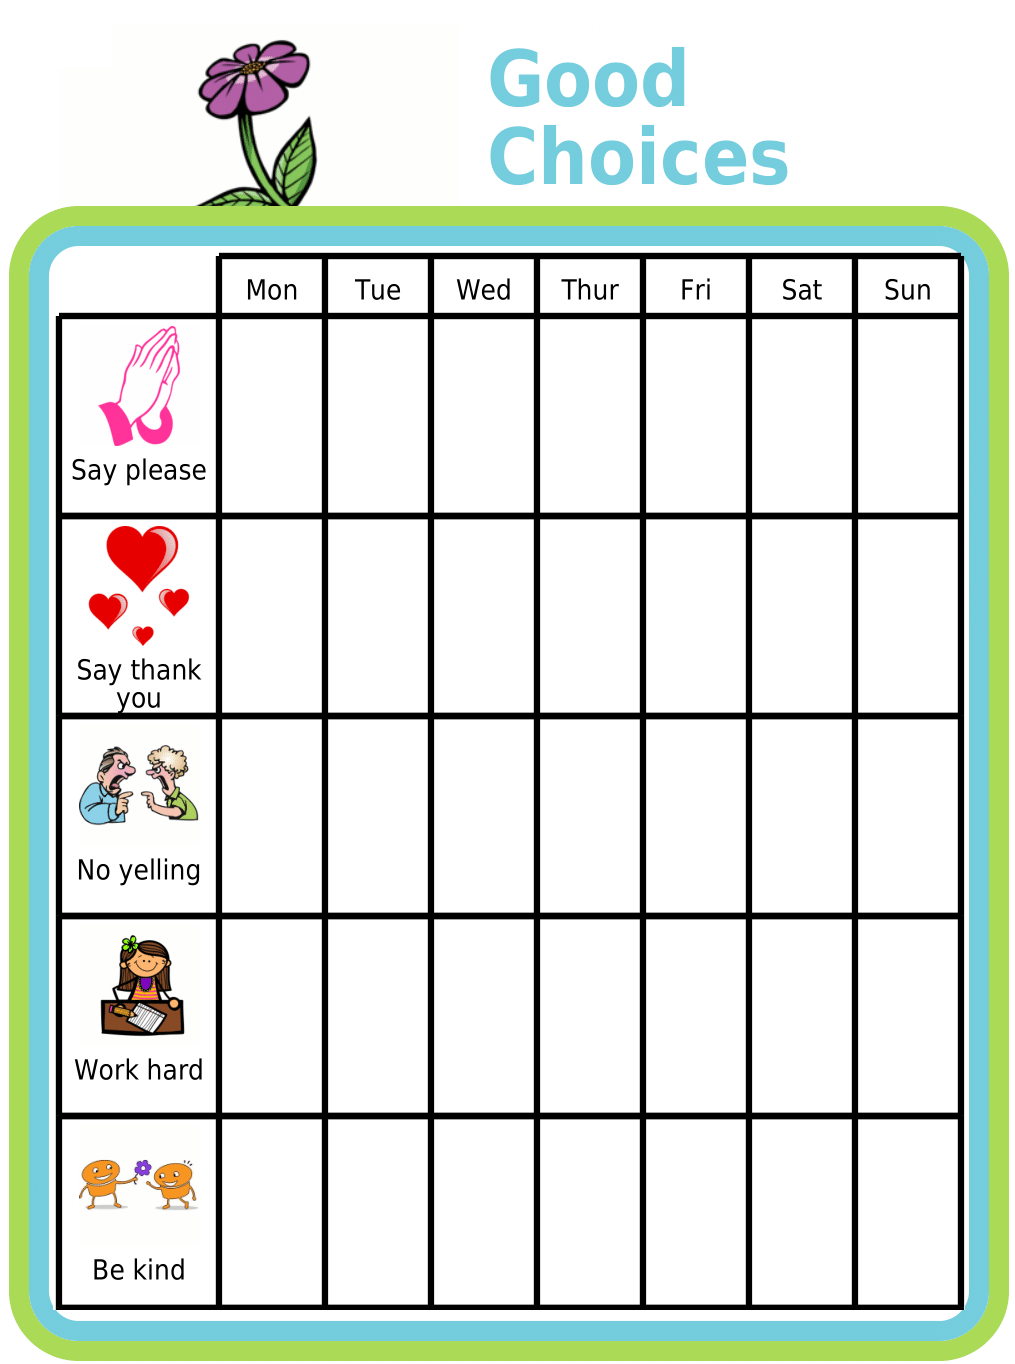 Picture checklist of weekly good choices chart